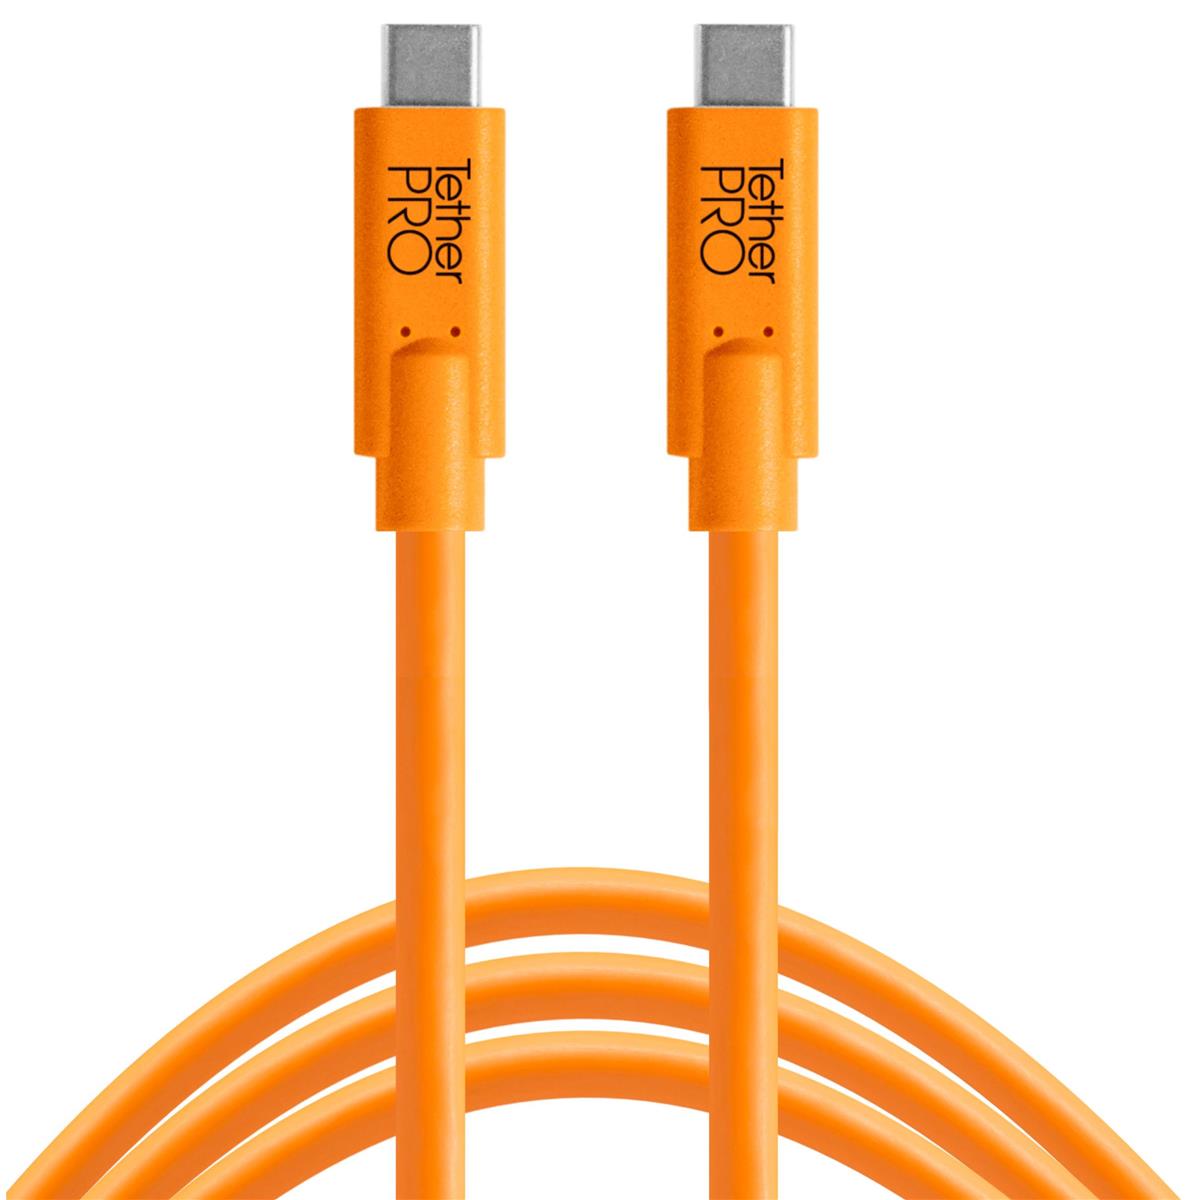 Tether Tools TetherPro USB Type-C Male to USB Type-C Male Cable (15', Orange) CUC15-ORG